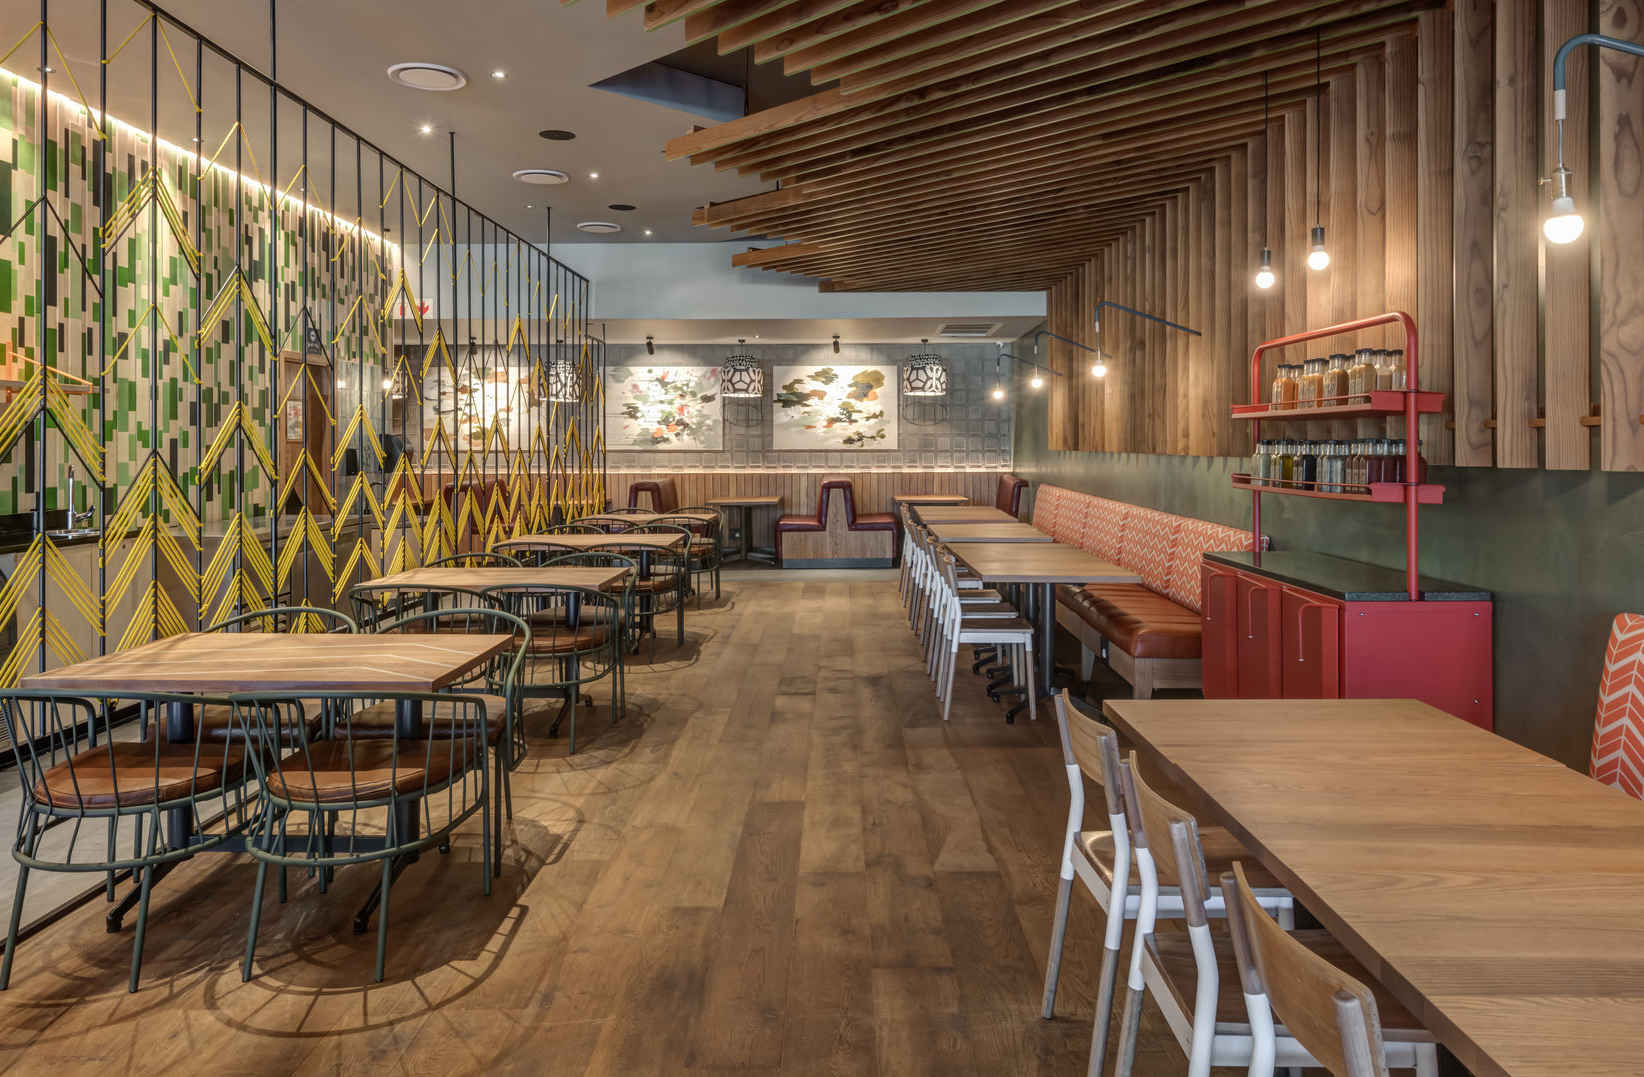 Nando's Hillcrest Mall - by Earthworld Architects